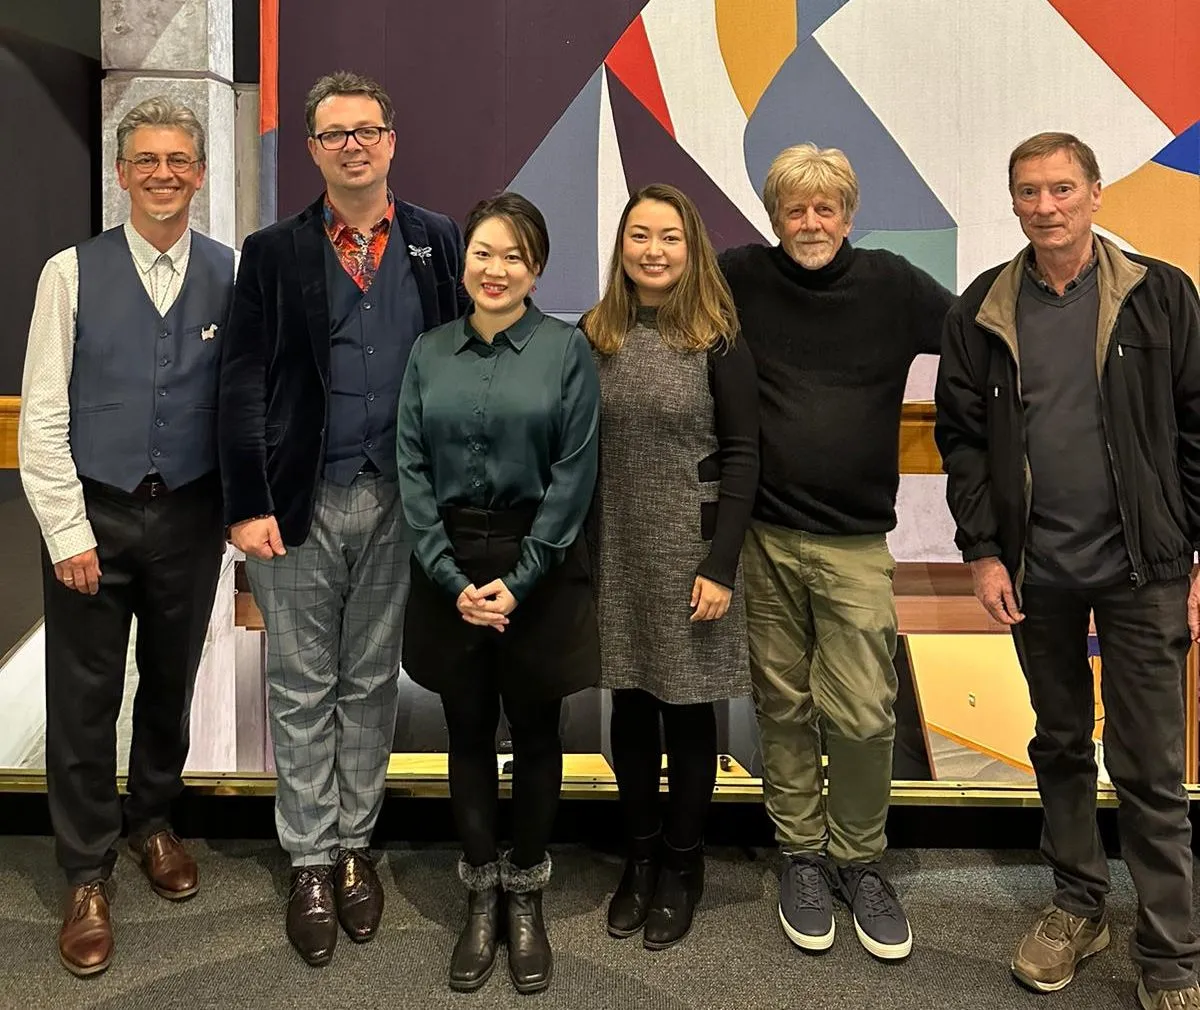 2023 NZ Composer Session participants (L to R): Mark Menzies (soloist), Chris Adams, Alissa Long, Salina Fisher, Chris Cree Brown, John Elmsly